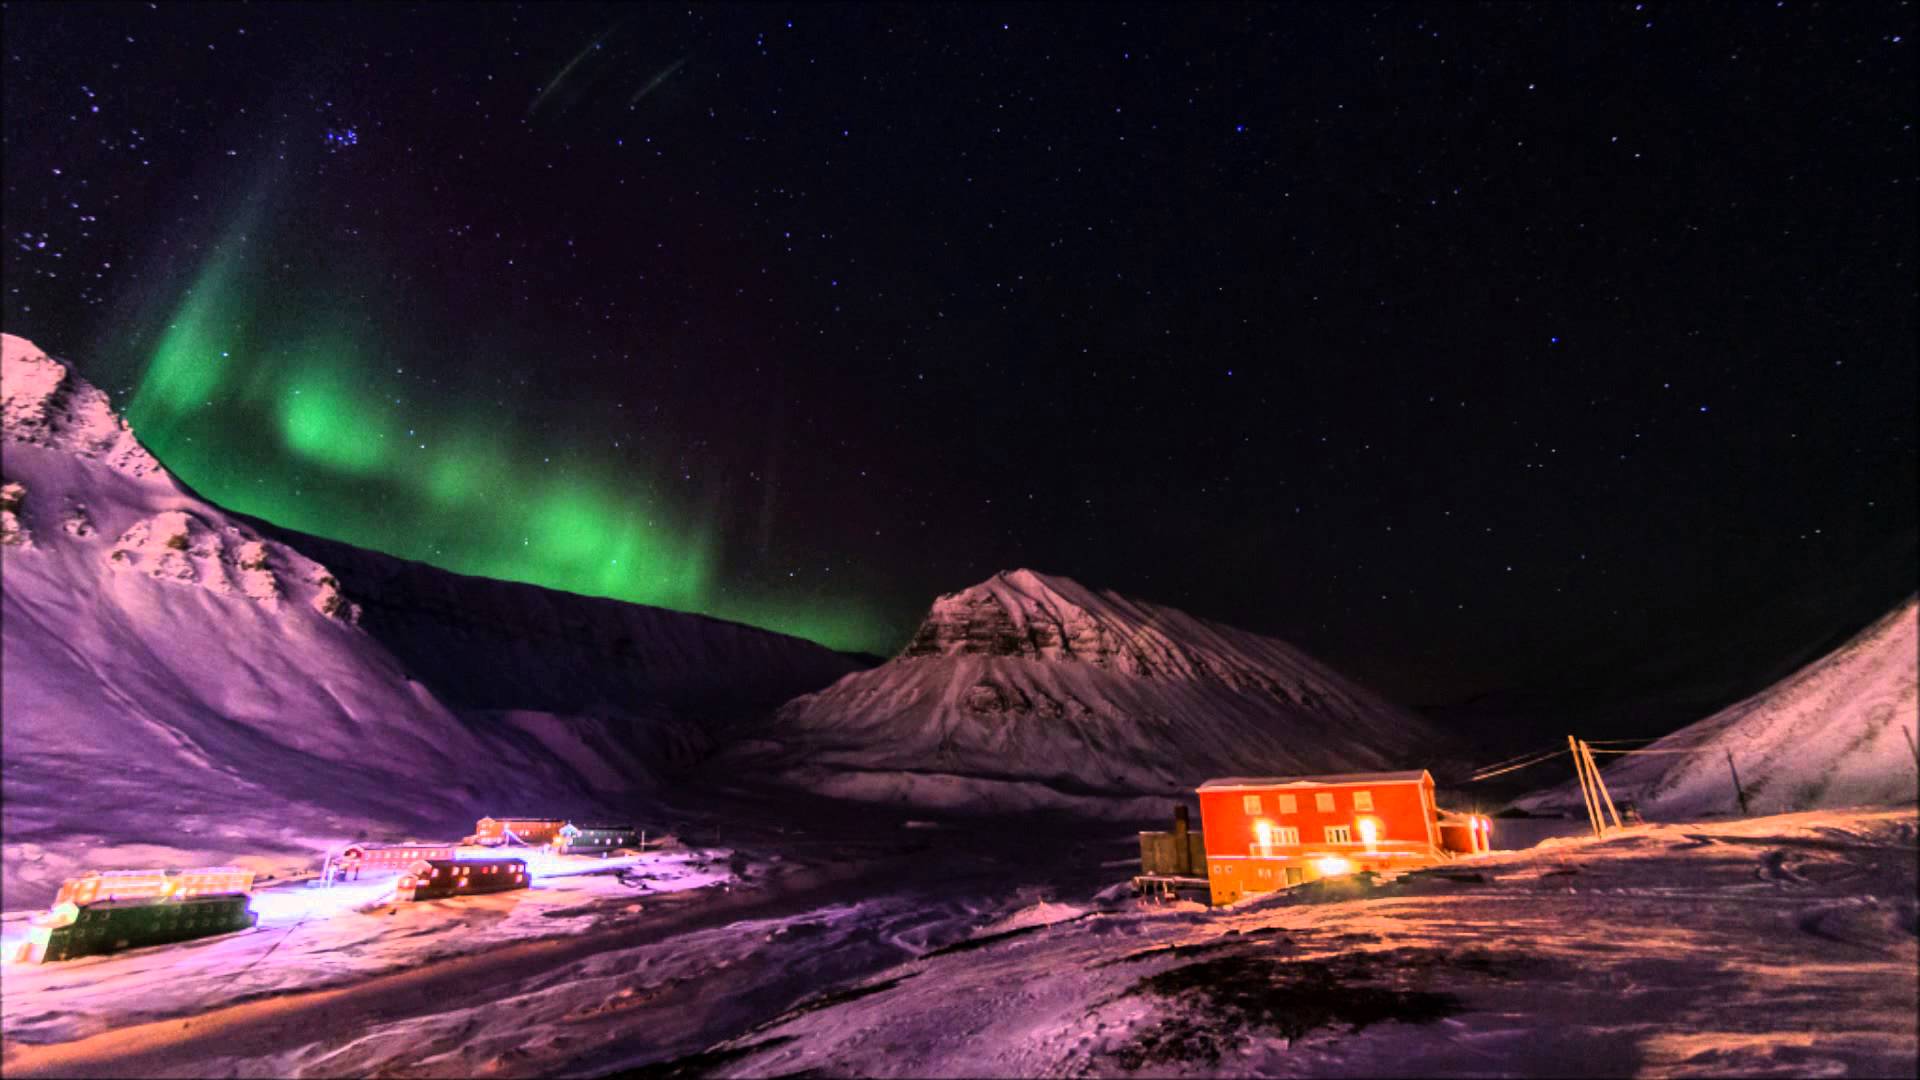 Svalbard Islands or Where to Hide From the World